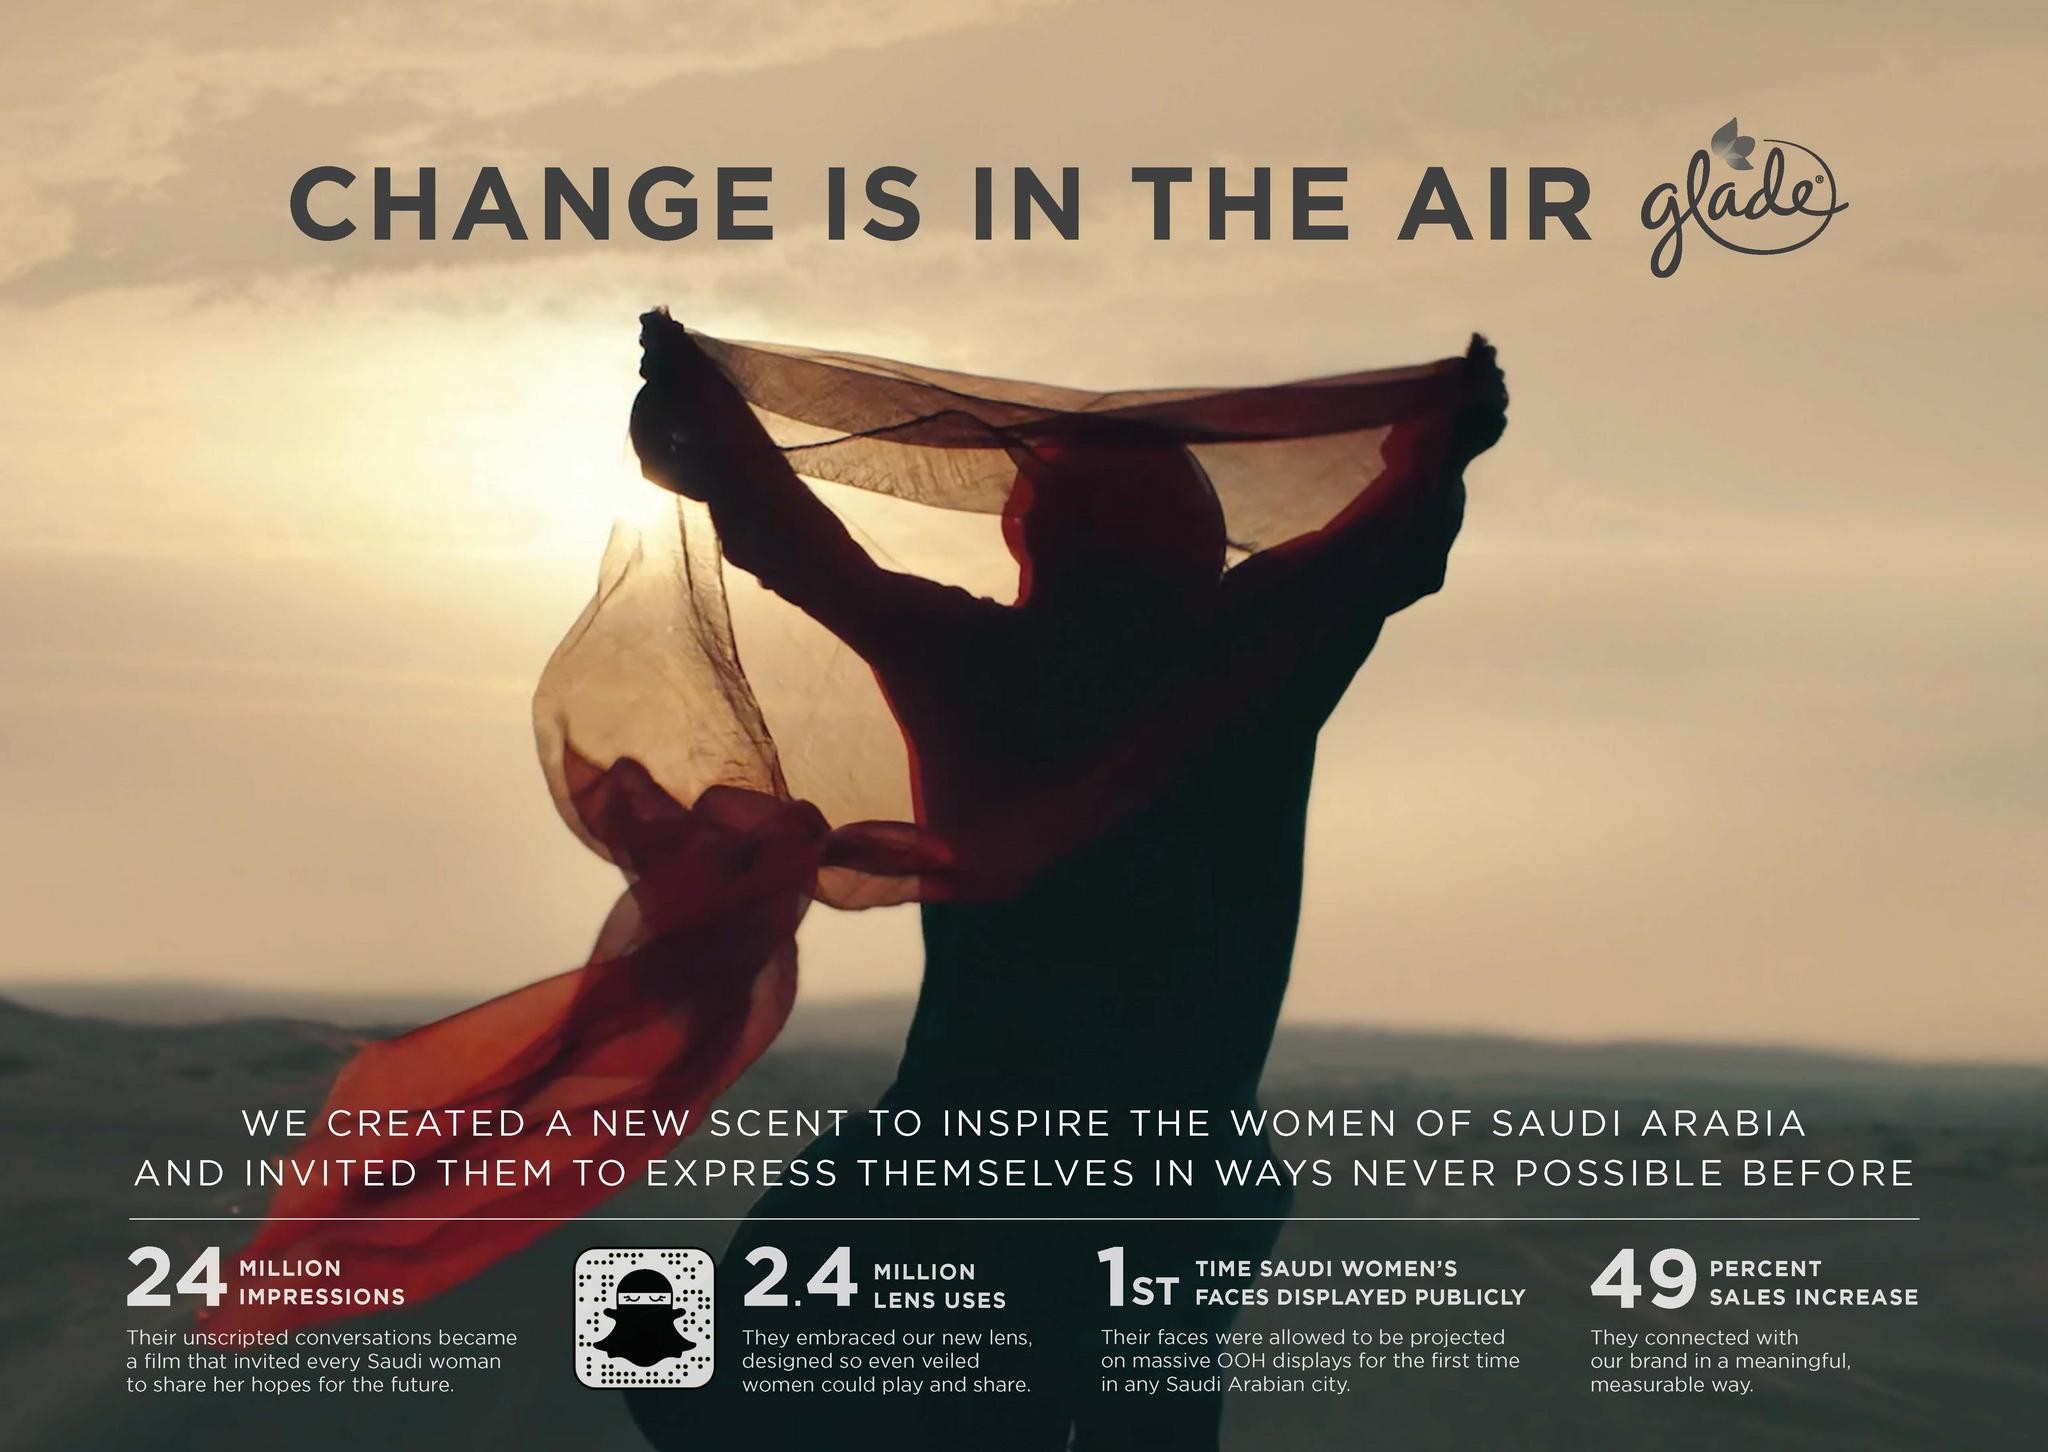 Glade, Change is in the Air